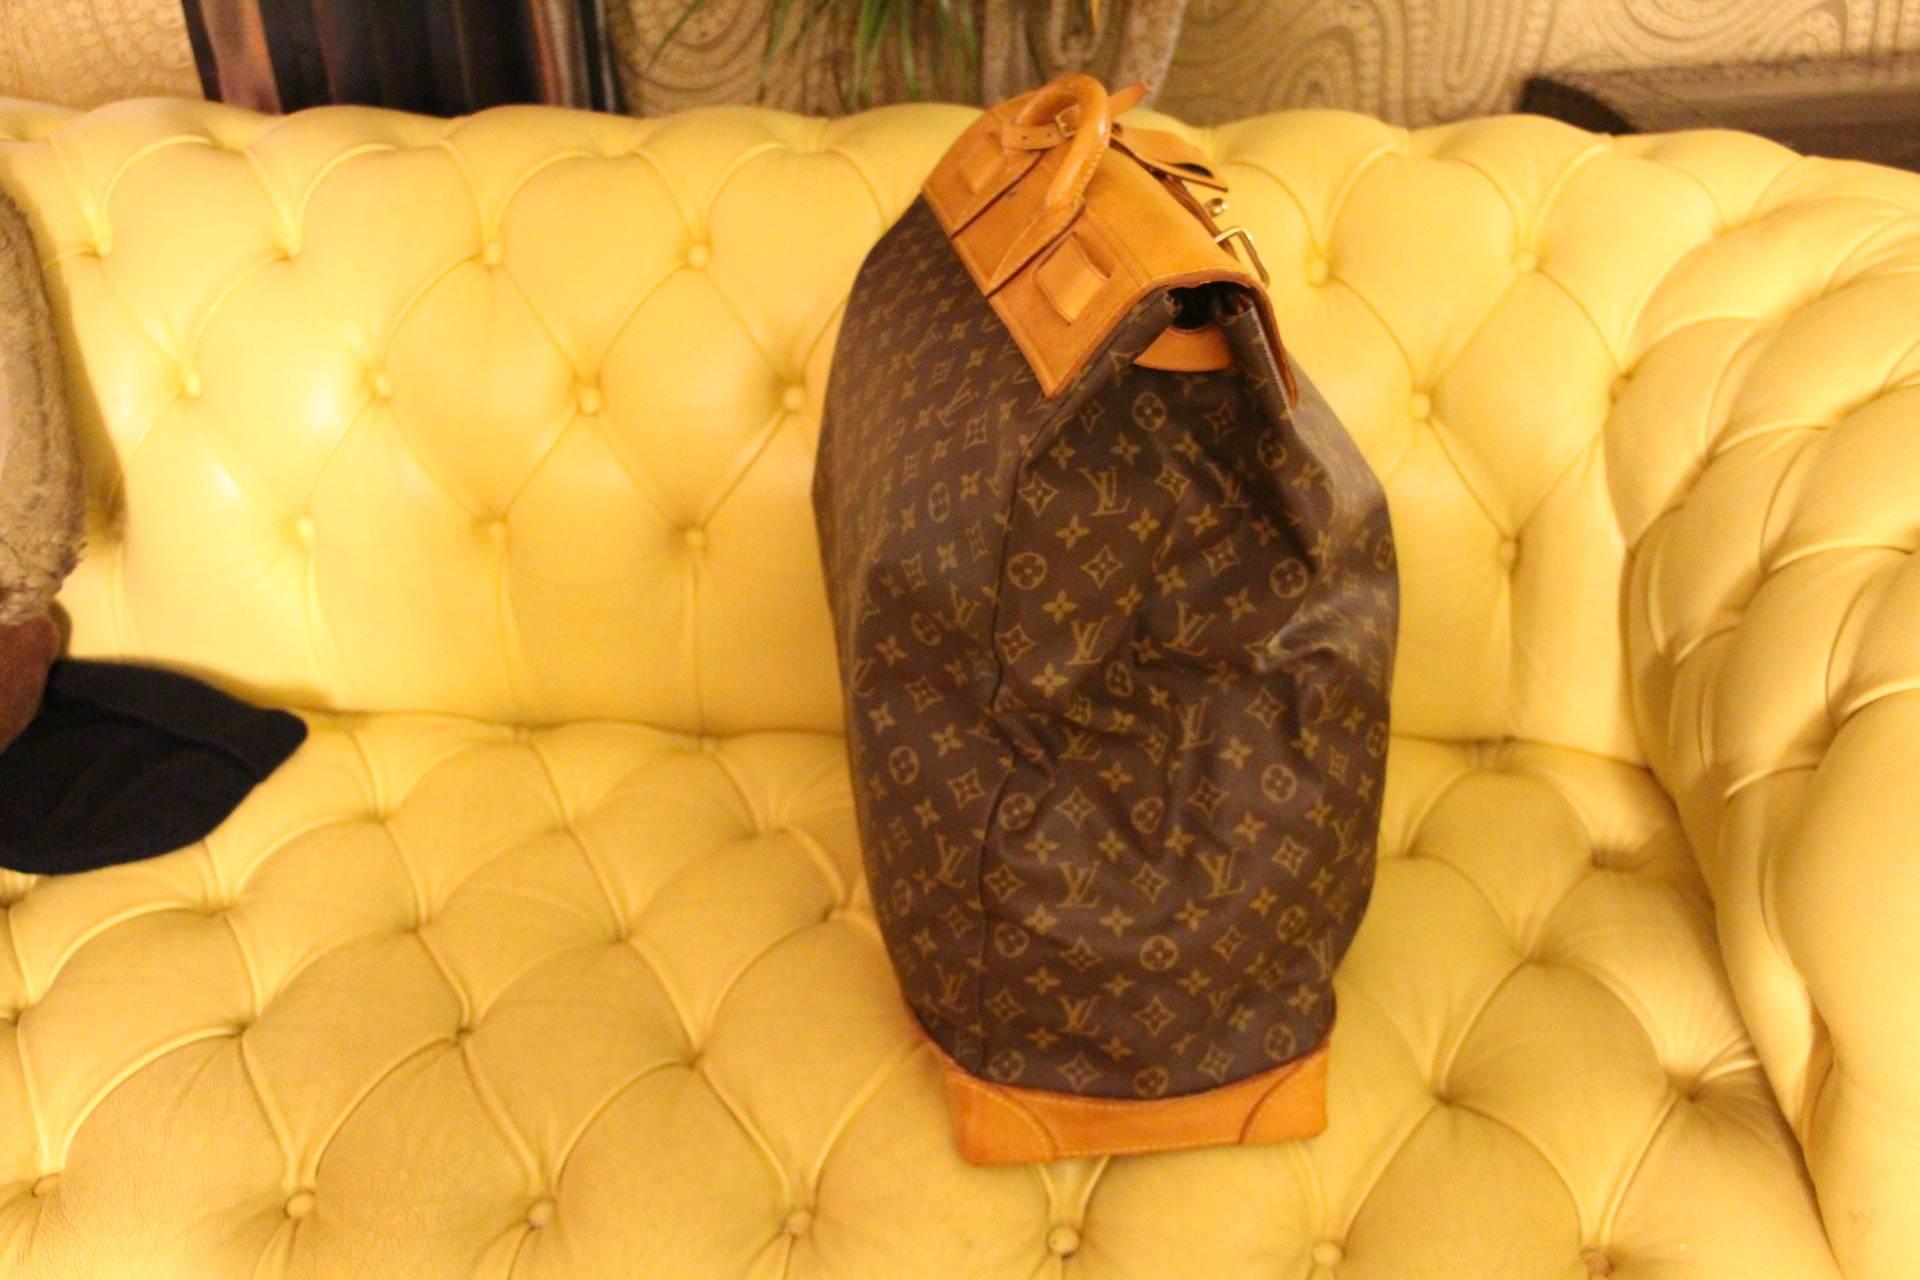 Beautiful Louis Vuitton monogram canvas.
Leather has got a very nice patina. No scratches. Original LV name holder.
Its interior is in very good condition, no stain and no smell.
As this bag is not sold any longer in Louis Vuitton stores, so it